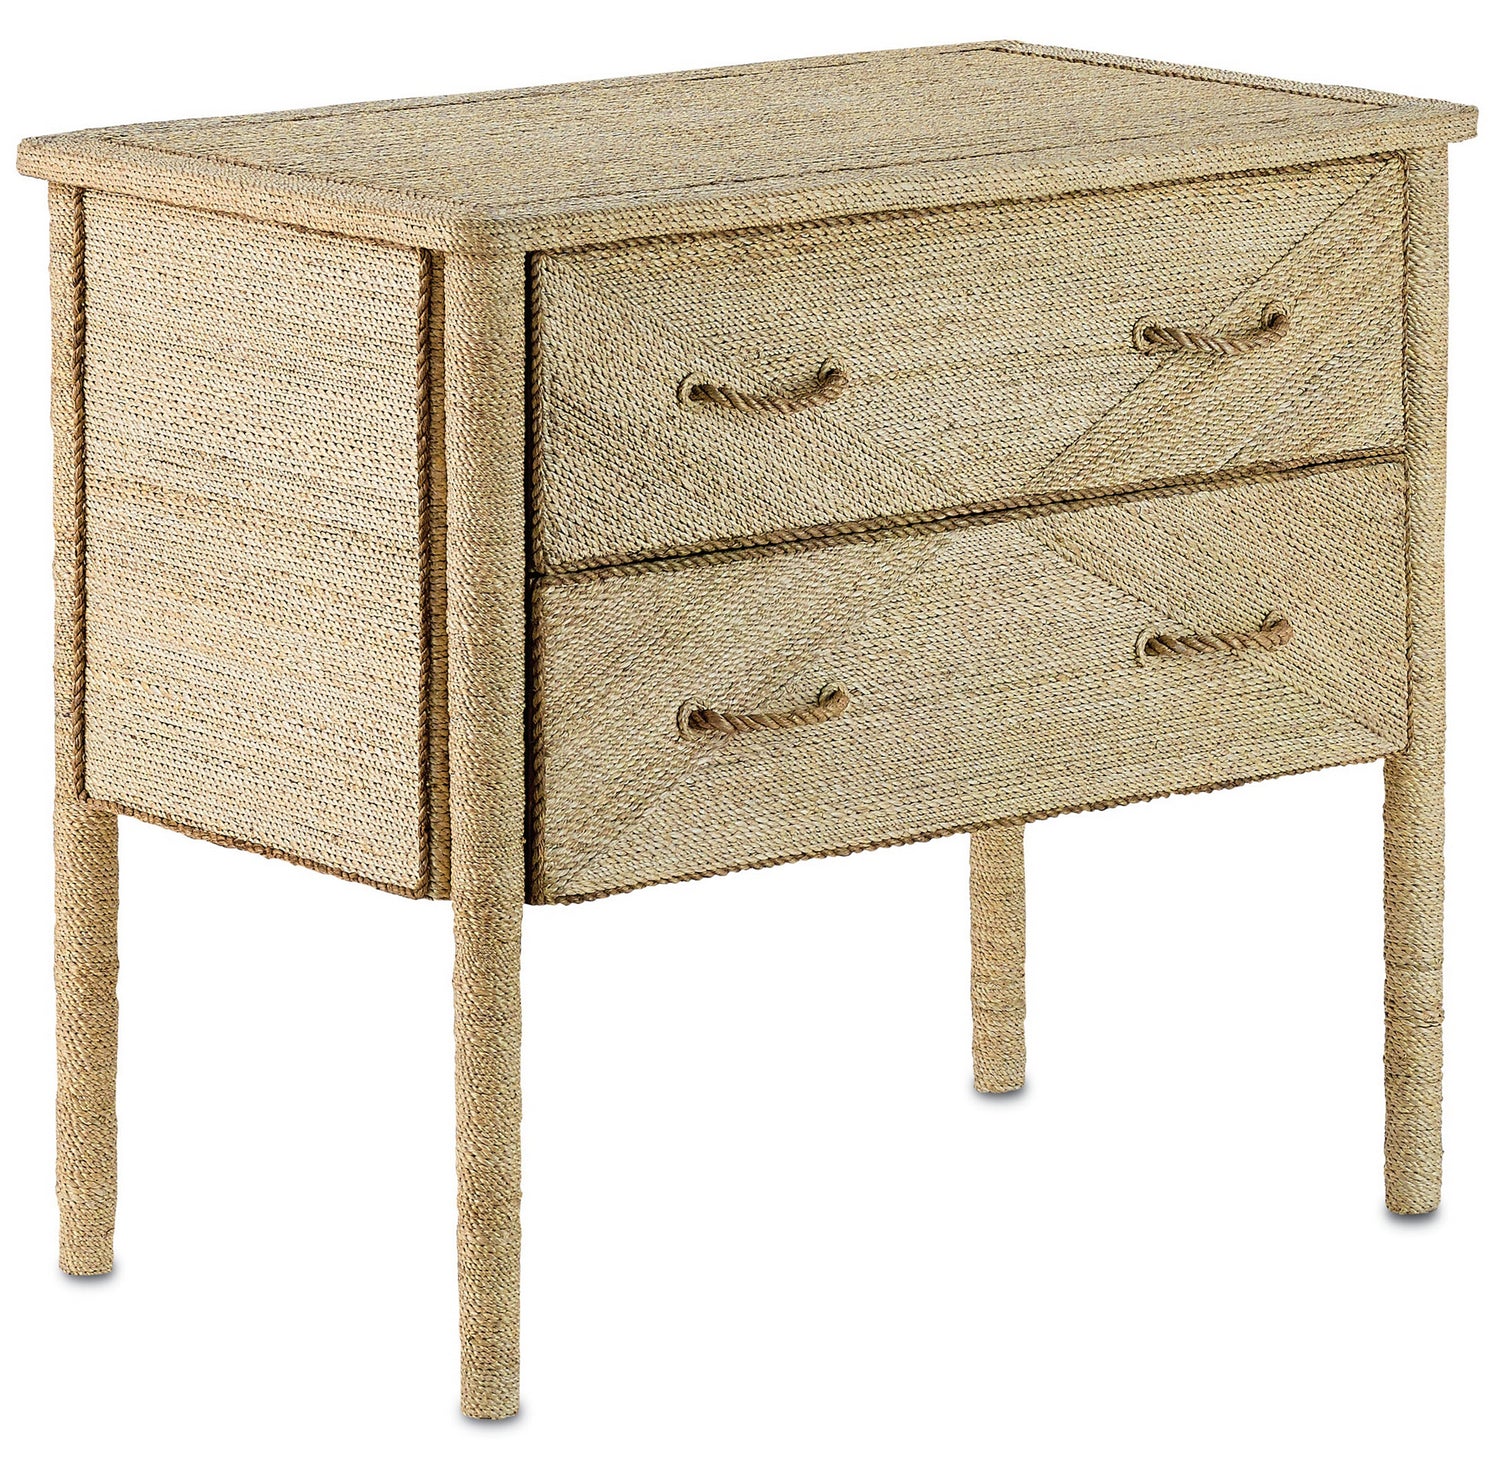 Chest from the Kaipo collection in Natural finish